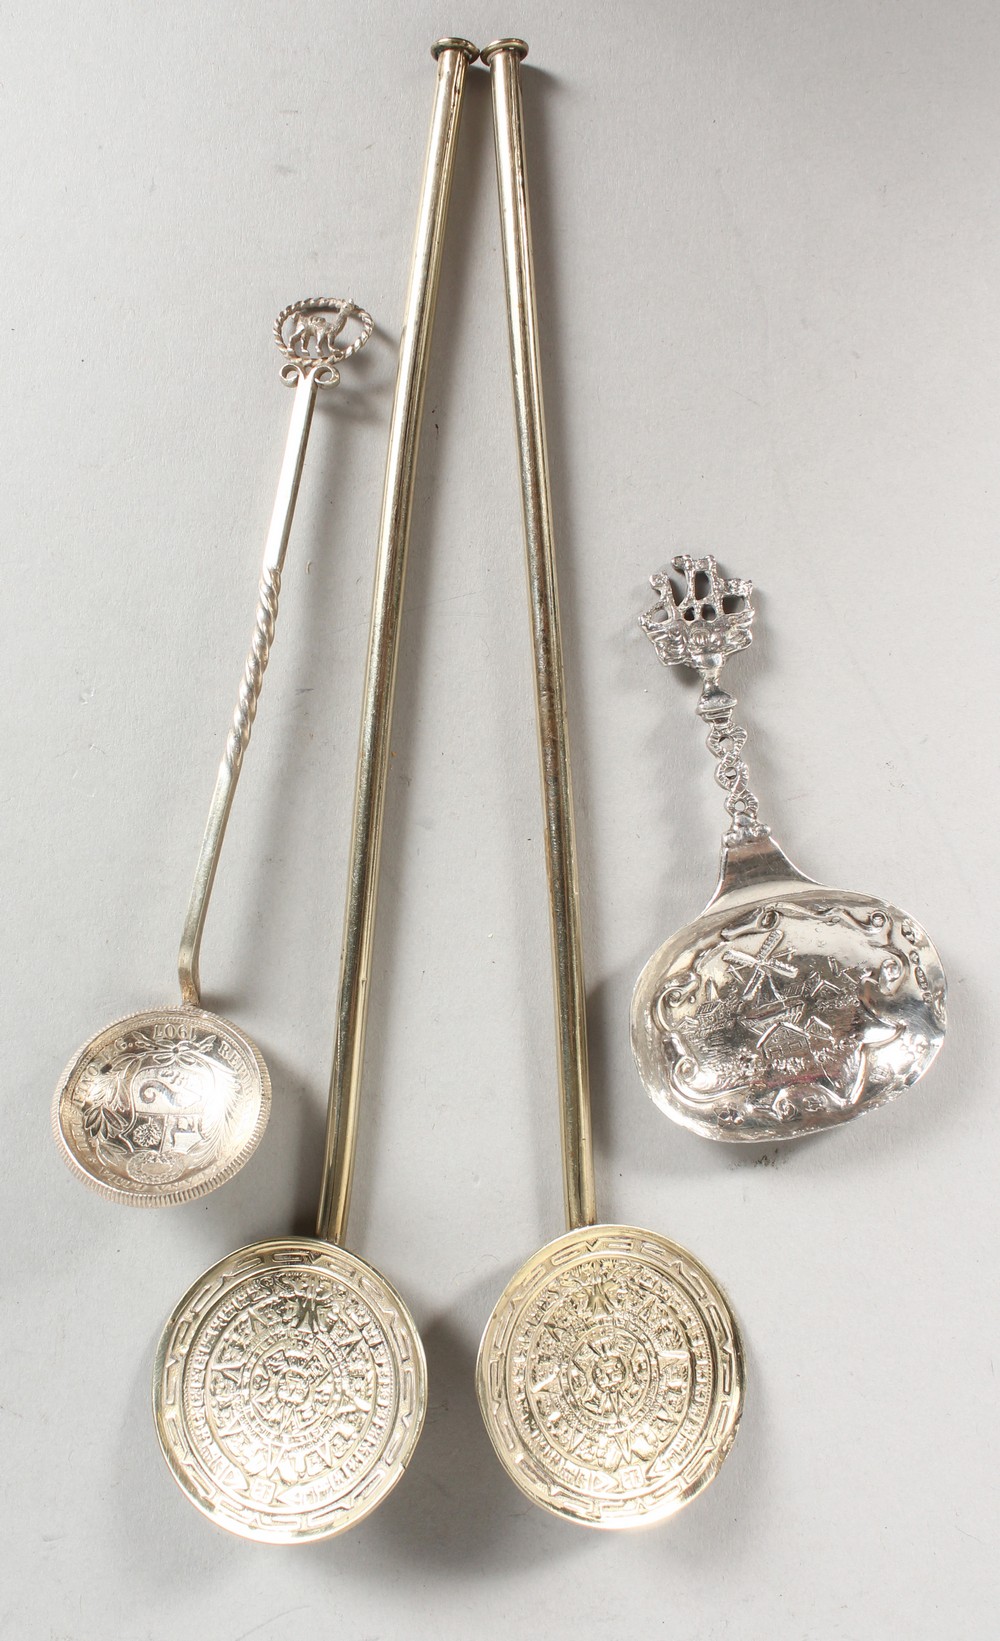 A PAIR OF STERLING SILVER GILT SPOONS, a caddy spoon and a coin spoon (4).